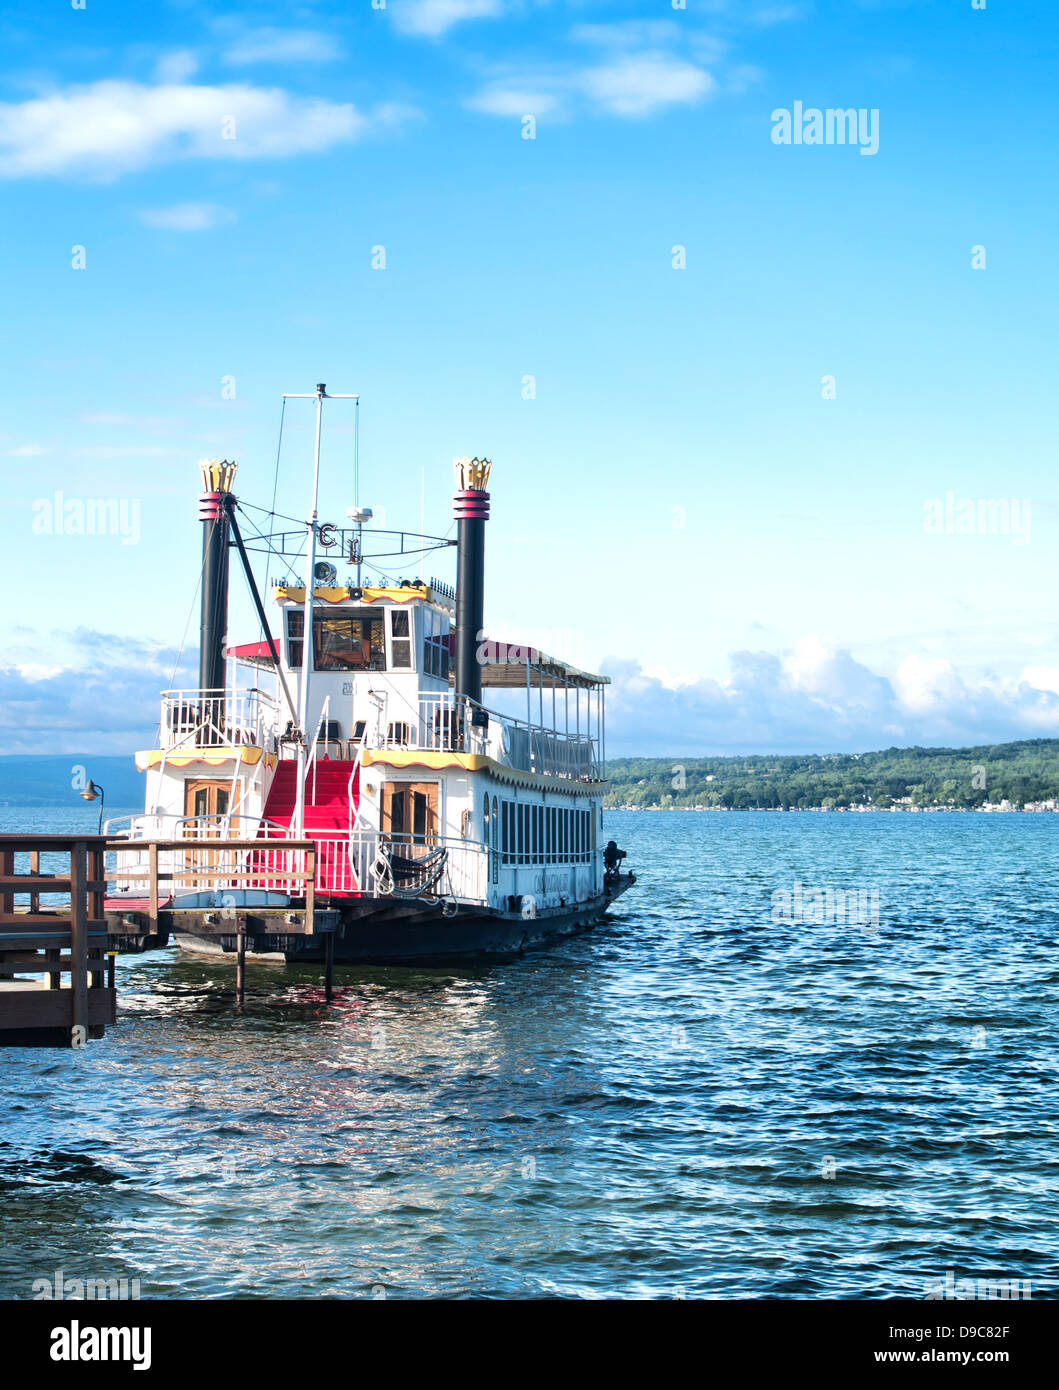 the canandaigua lady riverboat docked in canandaigua,new york Stock Photo